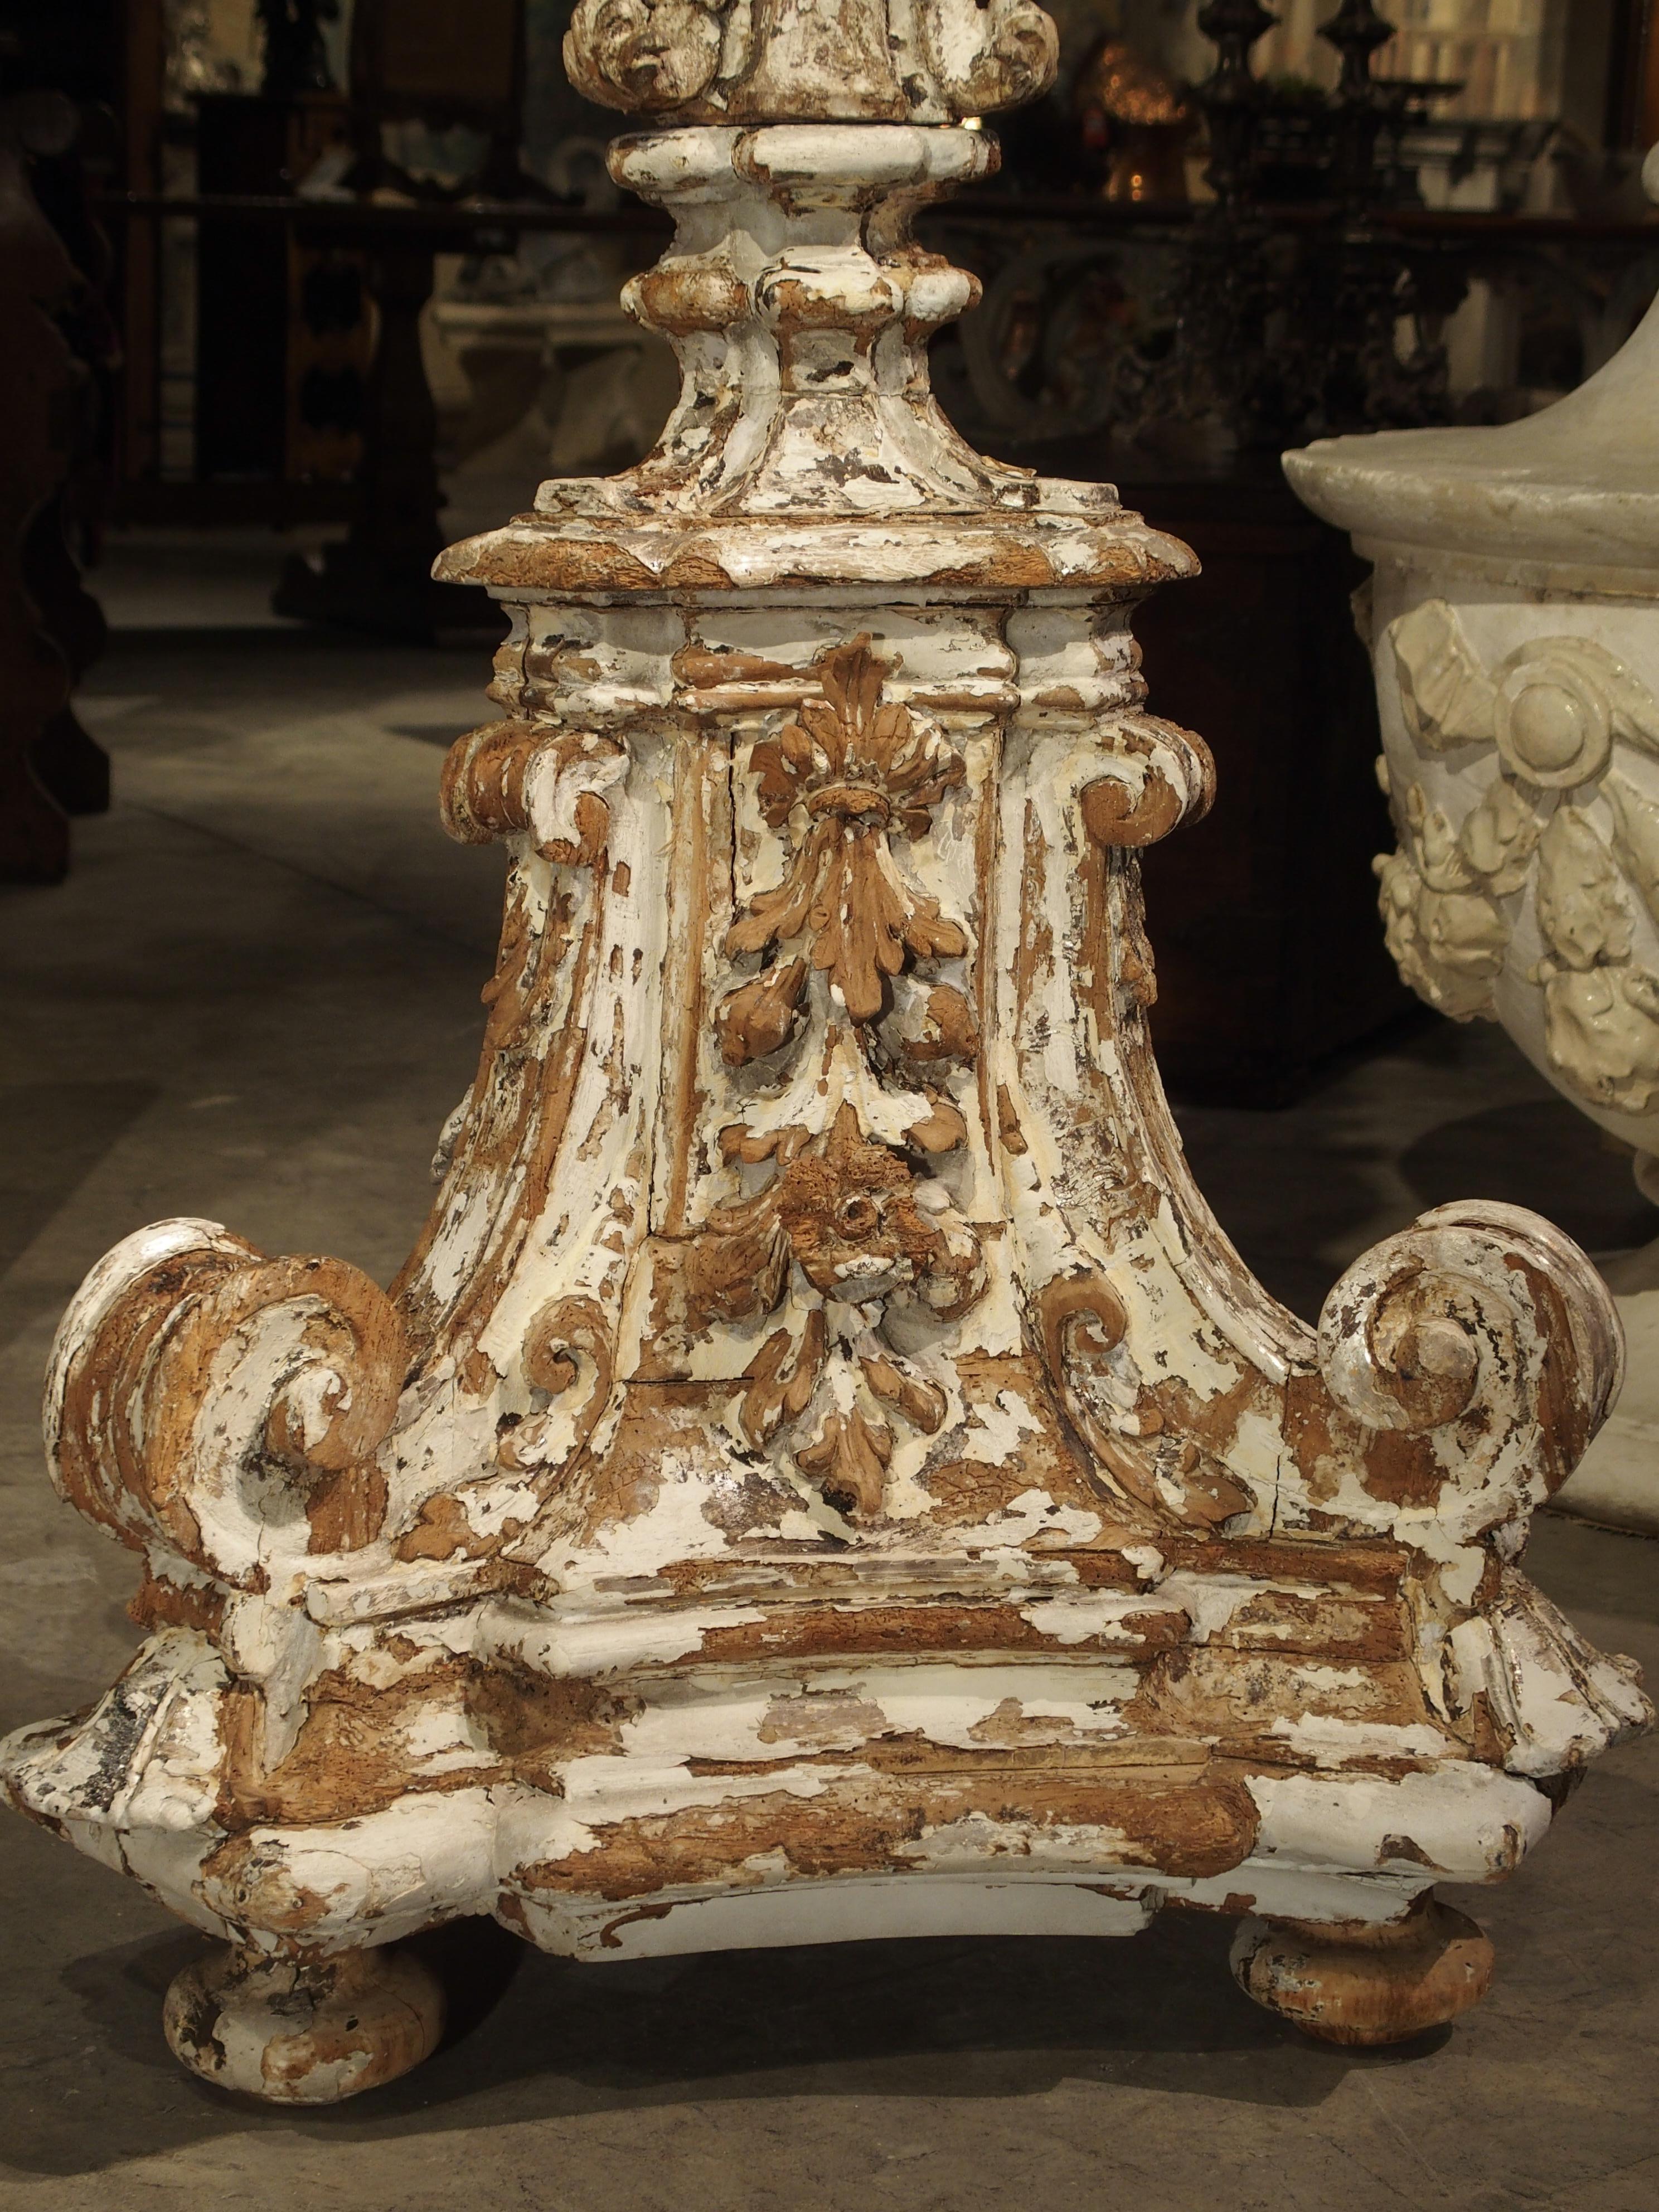 This parcel paint wooden floor torcheres from Italy date to the 1600s and they stand 7 feet tall. In person, they are very impressive and you immediately sense these were placed in a large and important space in their history. They have chips,